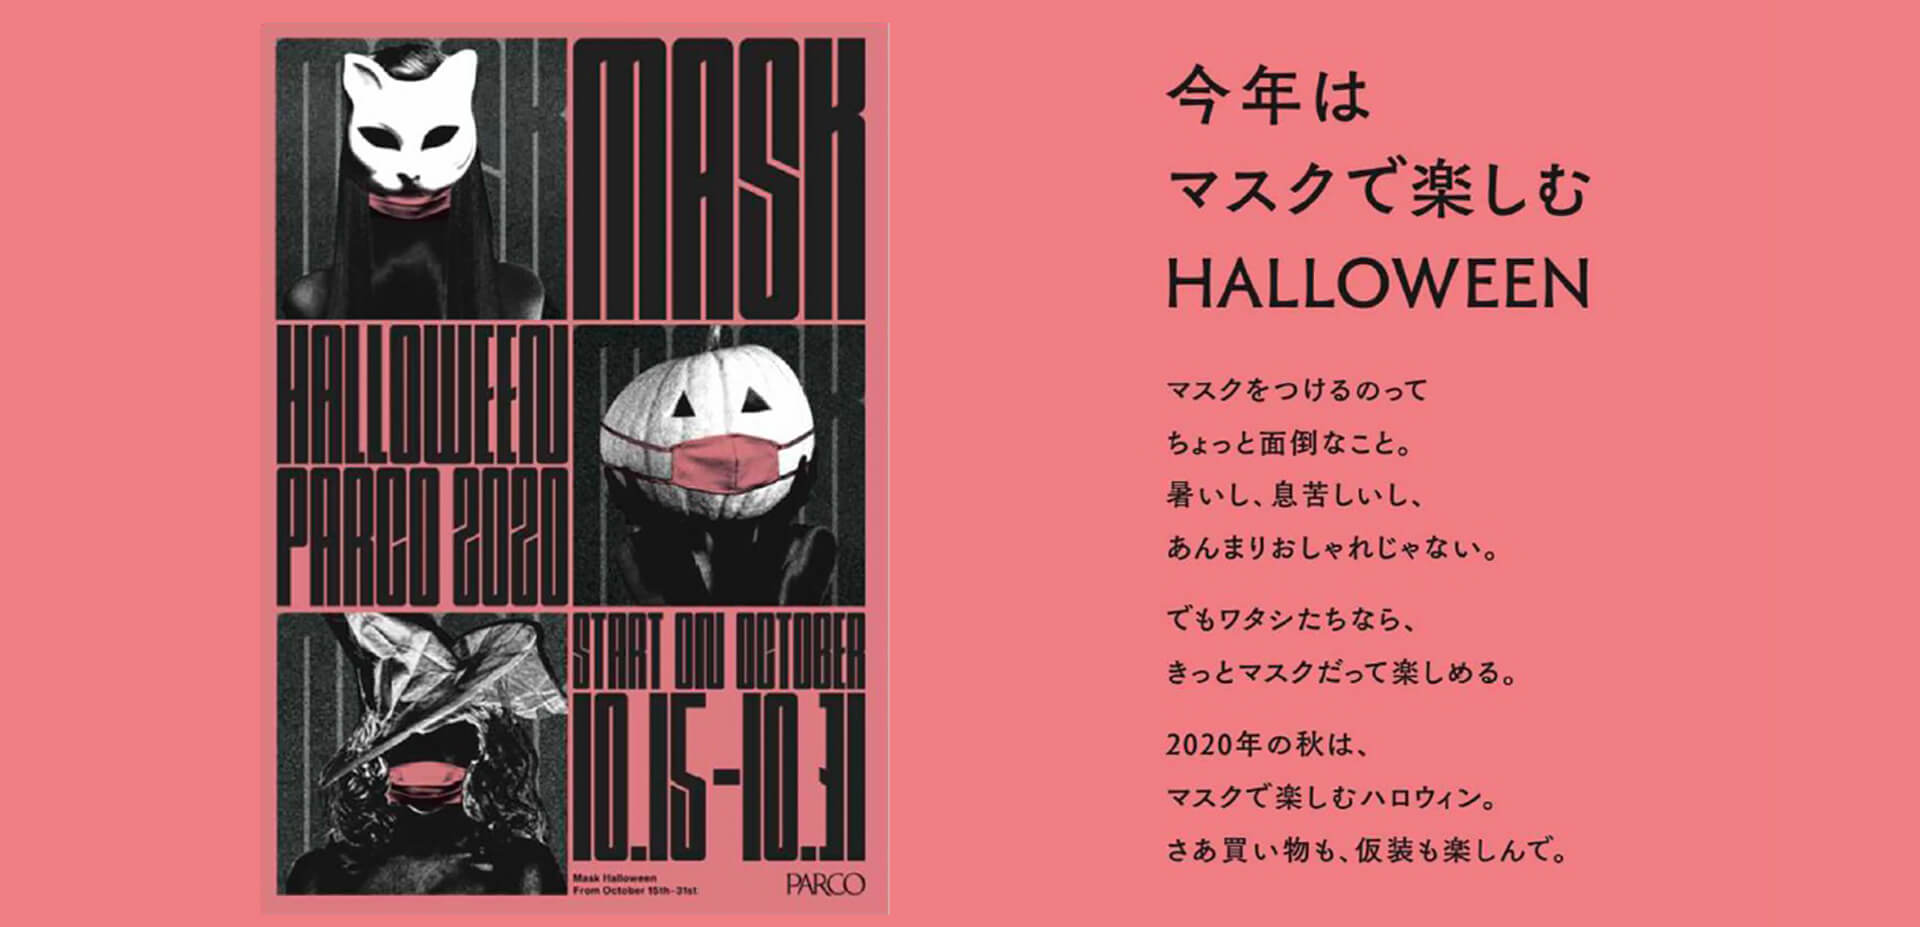 MASK HALLOWEEN PARCO 2020